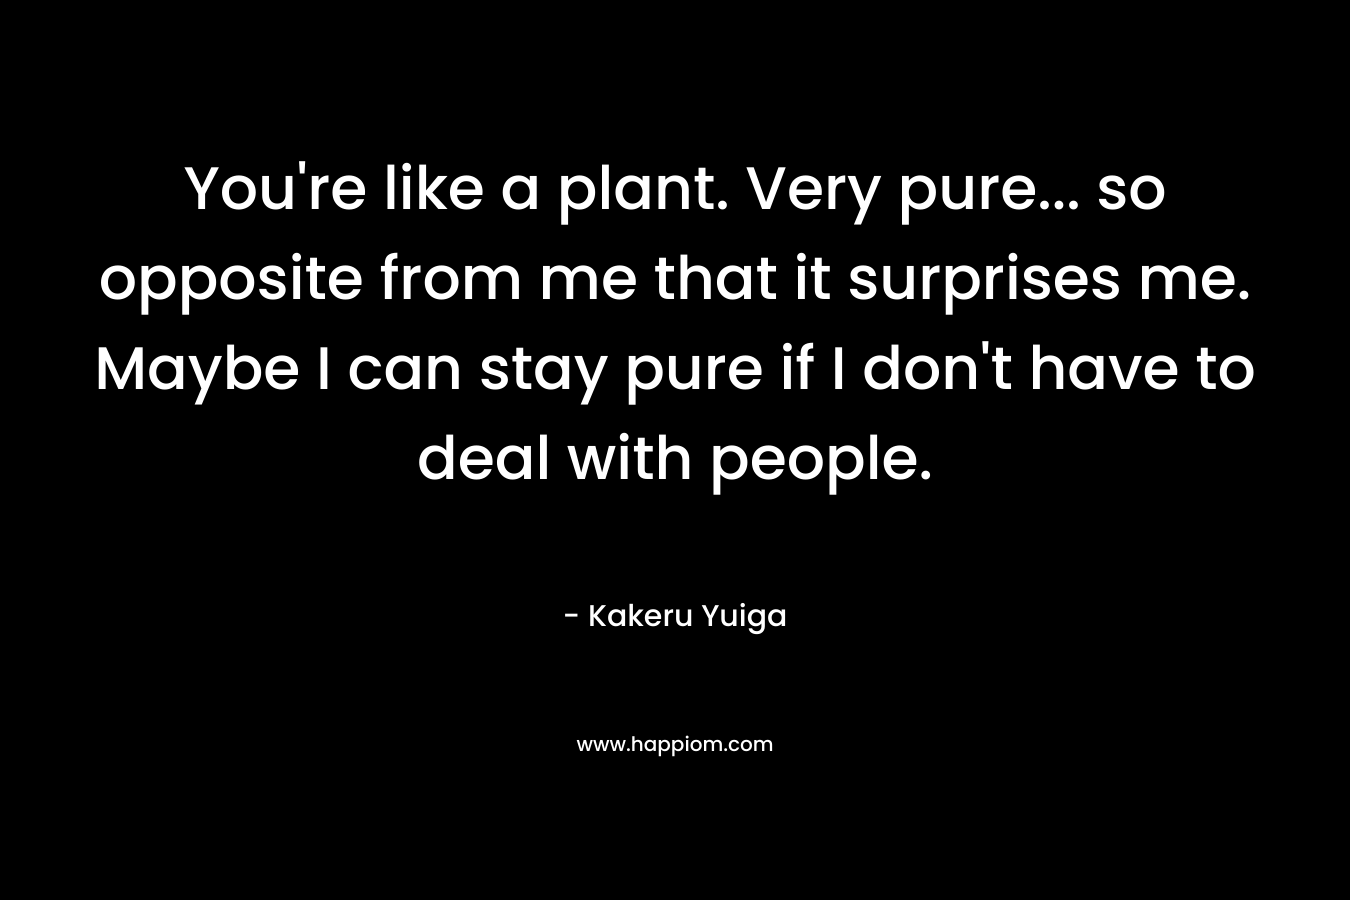 You're like a plant. Very pure... so opposite from me that it surprises me. Maybe I can stay pure if I don't have to deal with people.